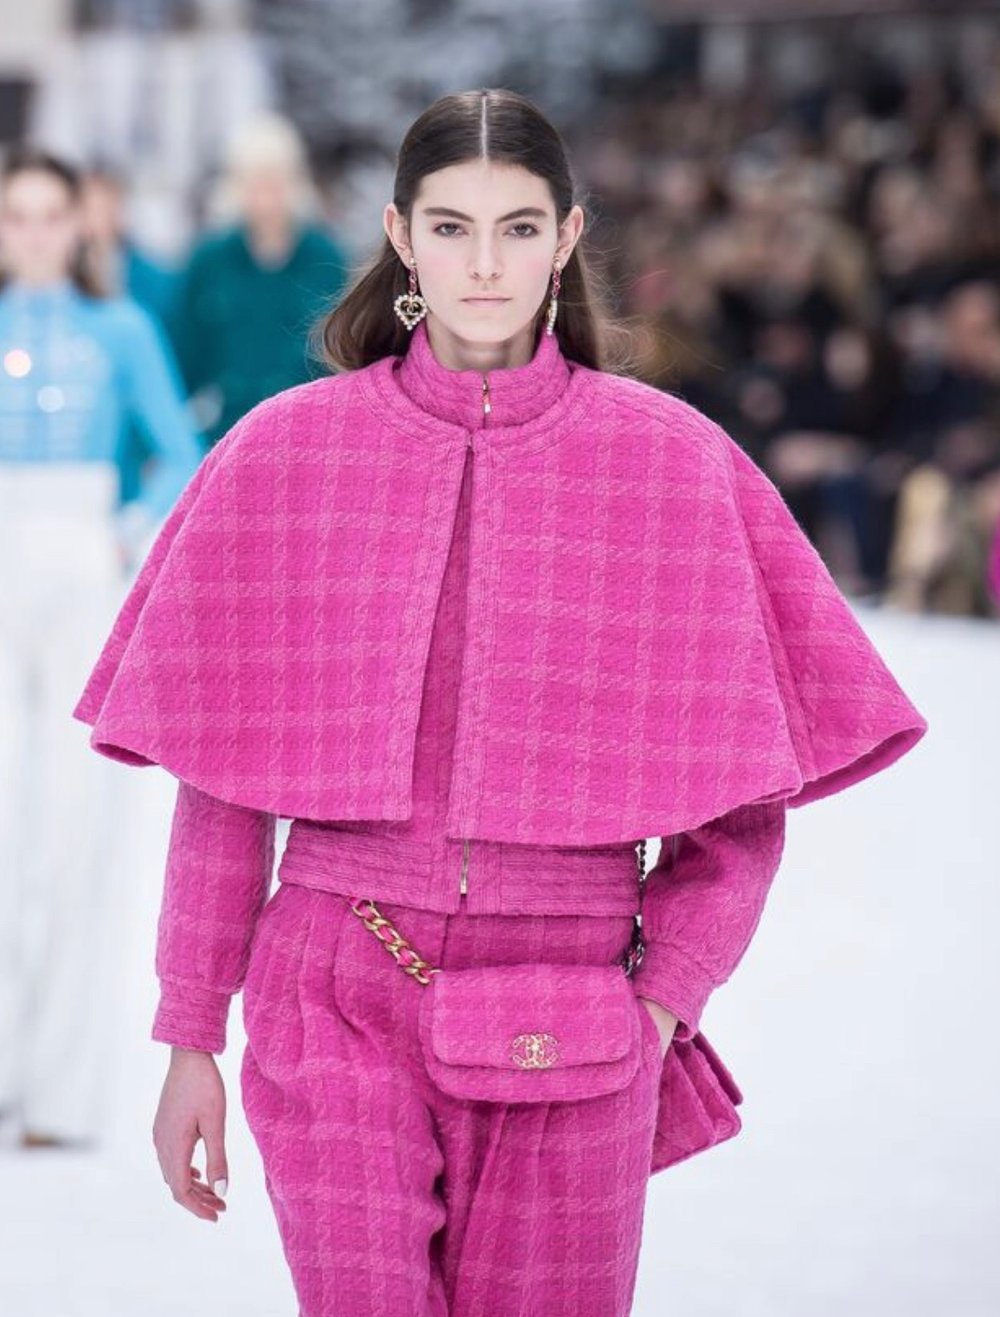 Chanel Pink Cape 2019 AW Collection by Karl Lagerfeld — Socialite Auctions